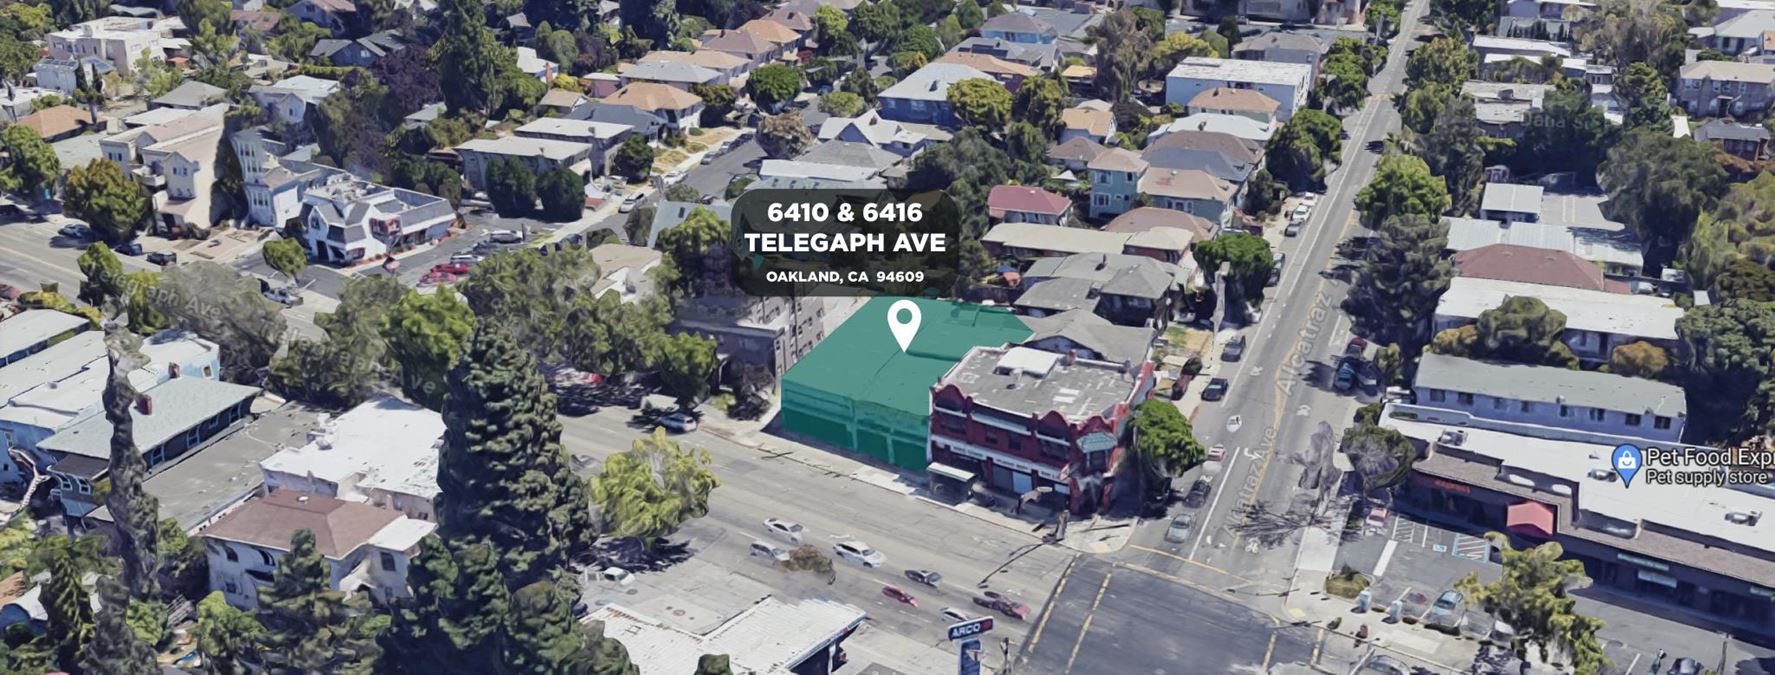 RETAIL DEVELOPMENT OPPORTUNITY IN NORTH OAKLAND